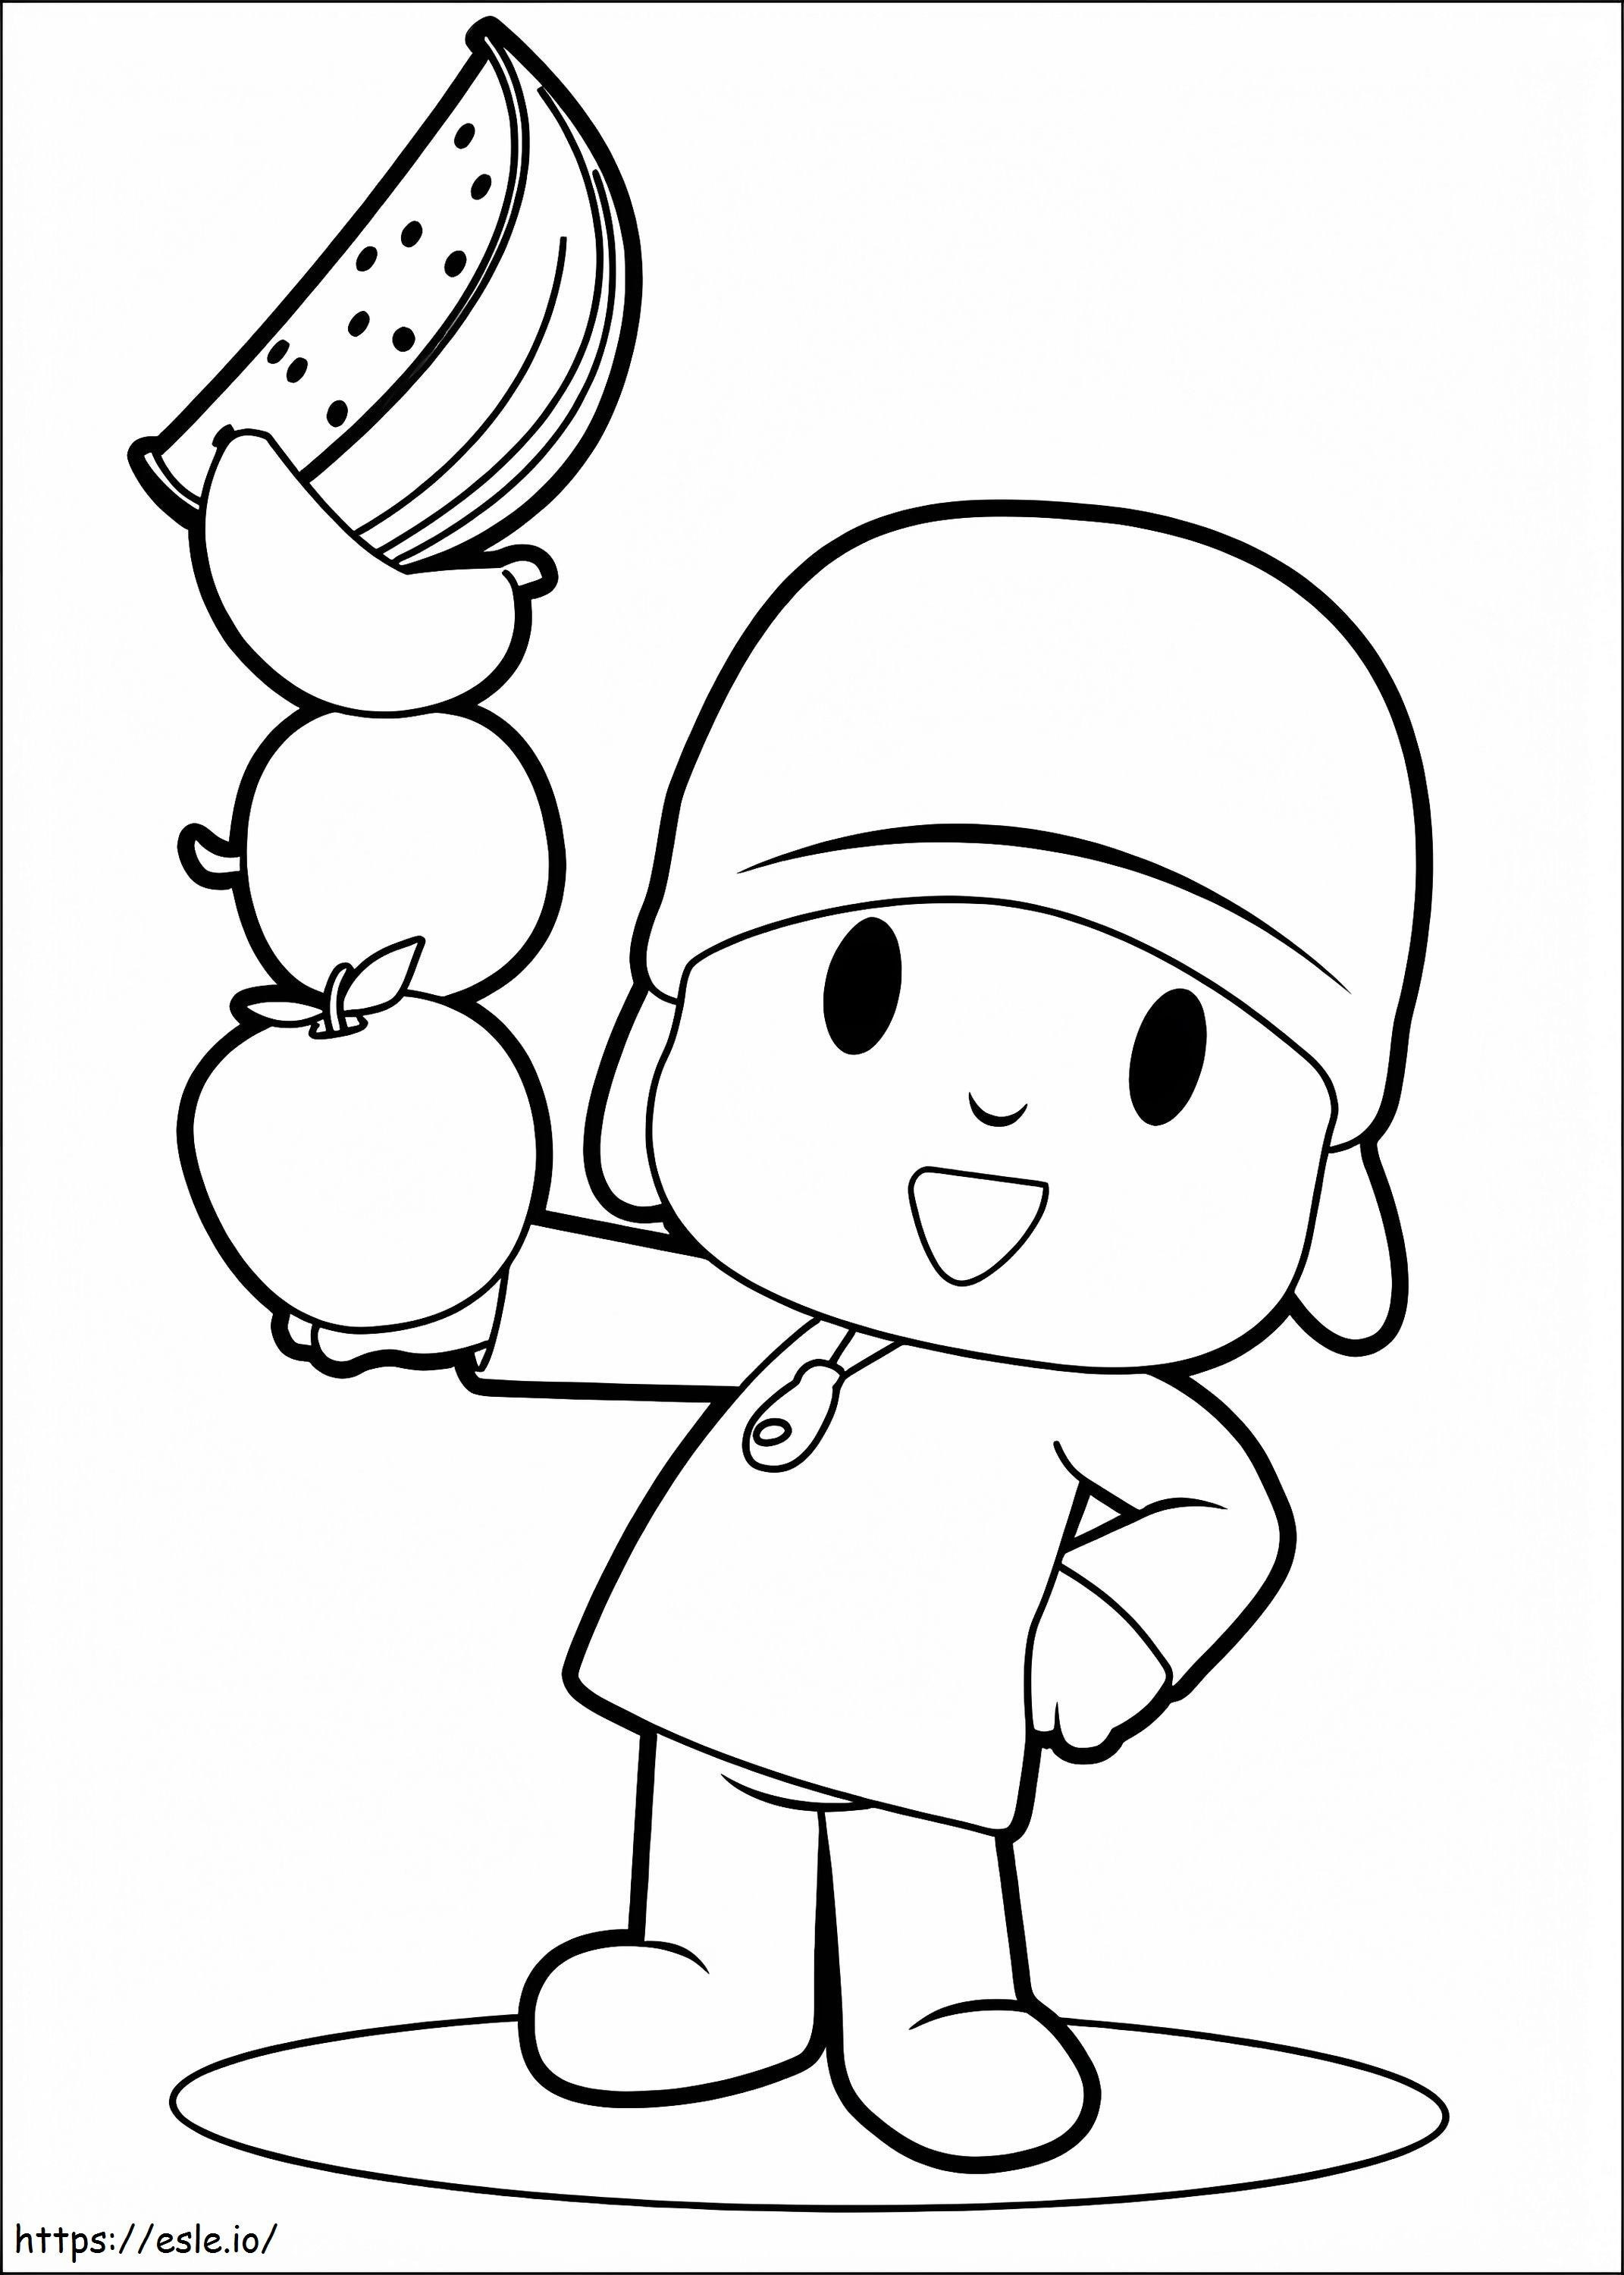 Pocoyo And Fruits coloring page